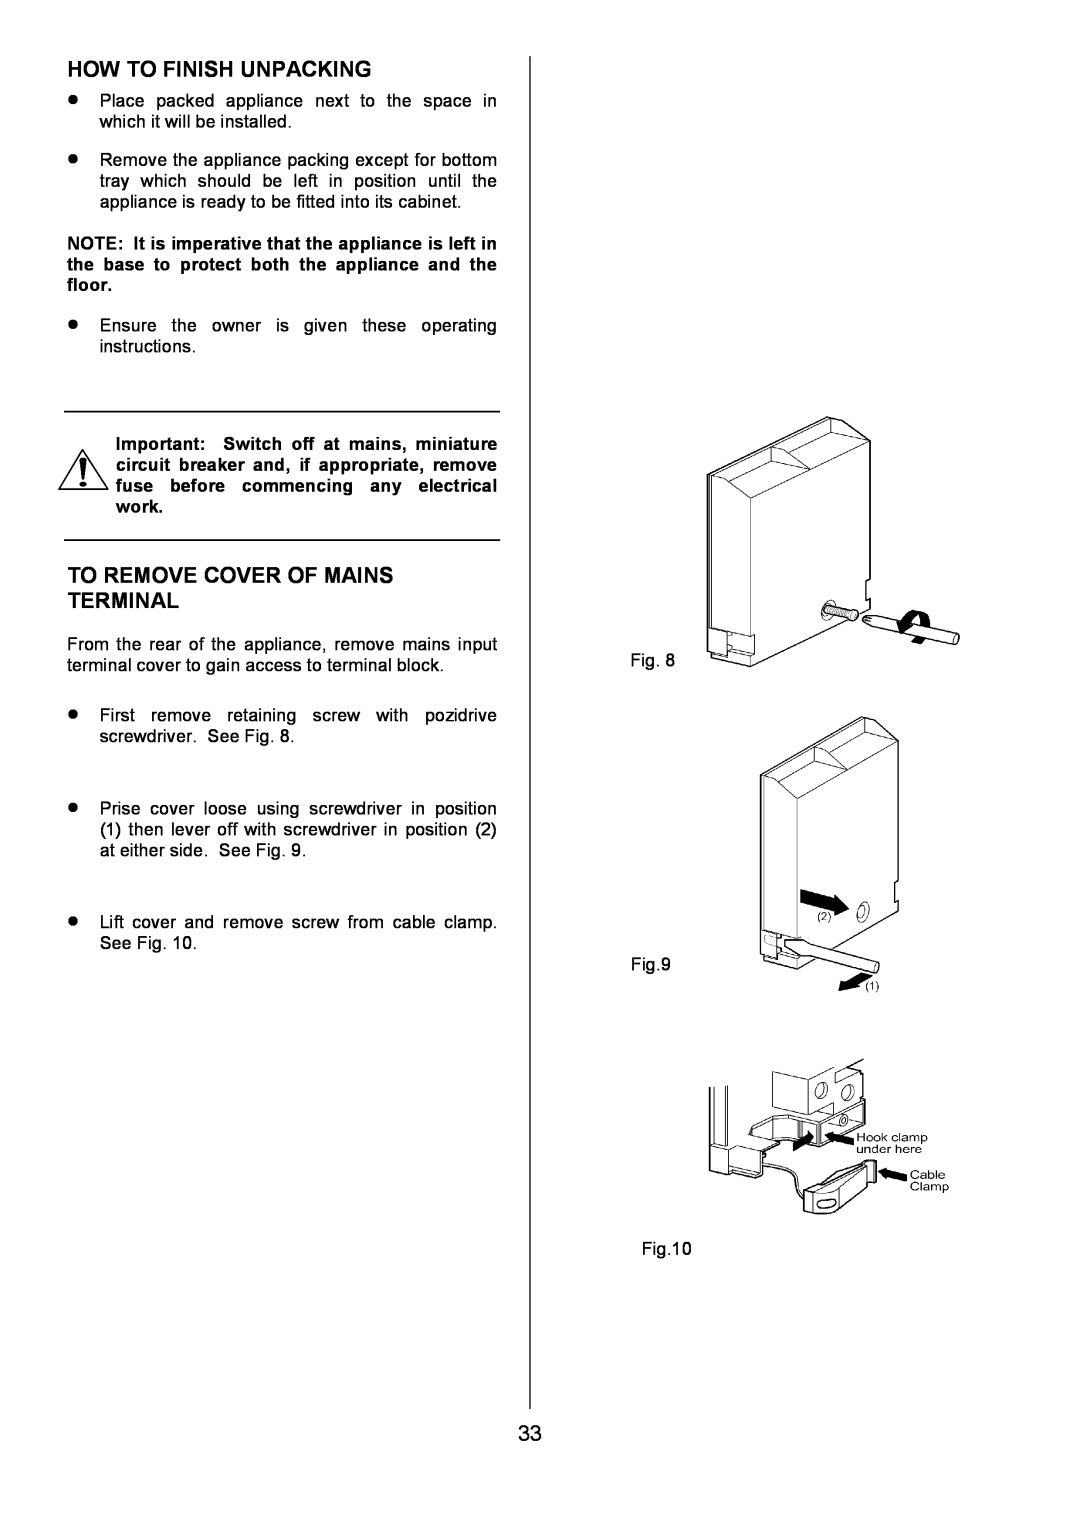 Electrolux U3100-4 manual How To Finish Unpacking, To Remove Cover Of Mains Terminal 